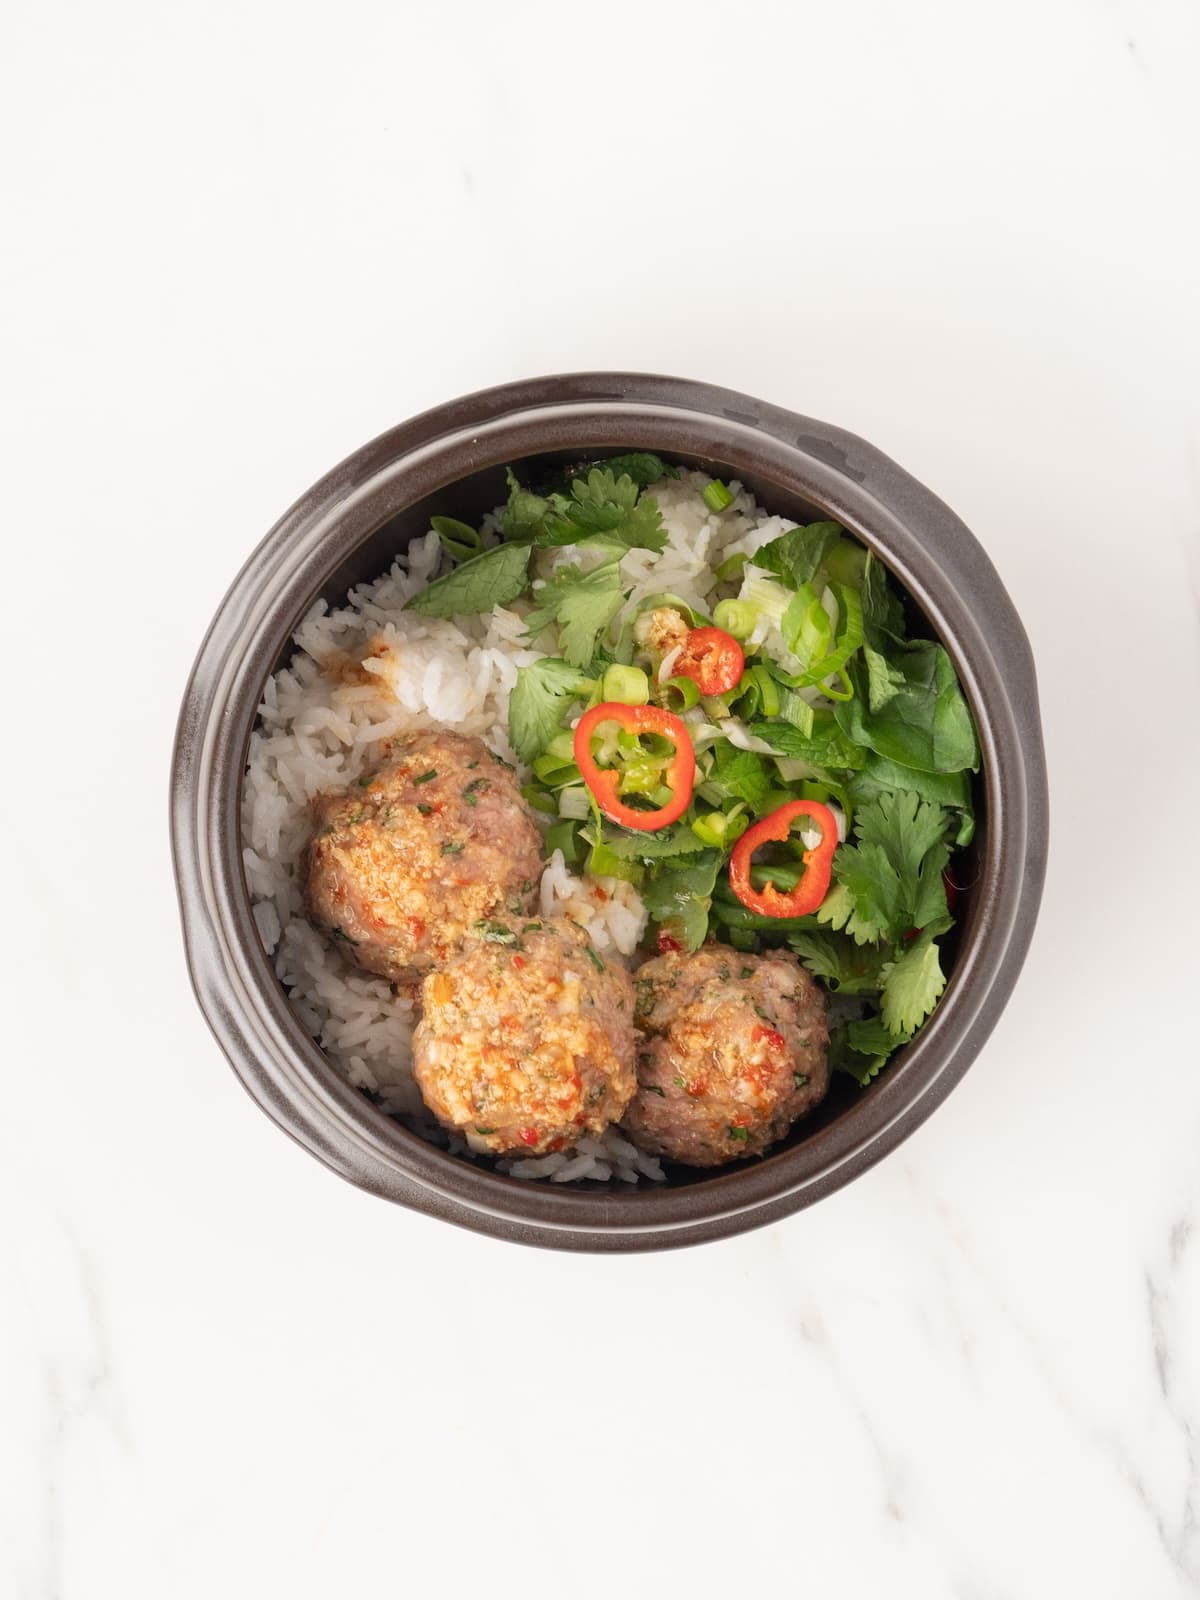 A bowl with rice, herb salad and pork meatballs with sliced fresno chilis.